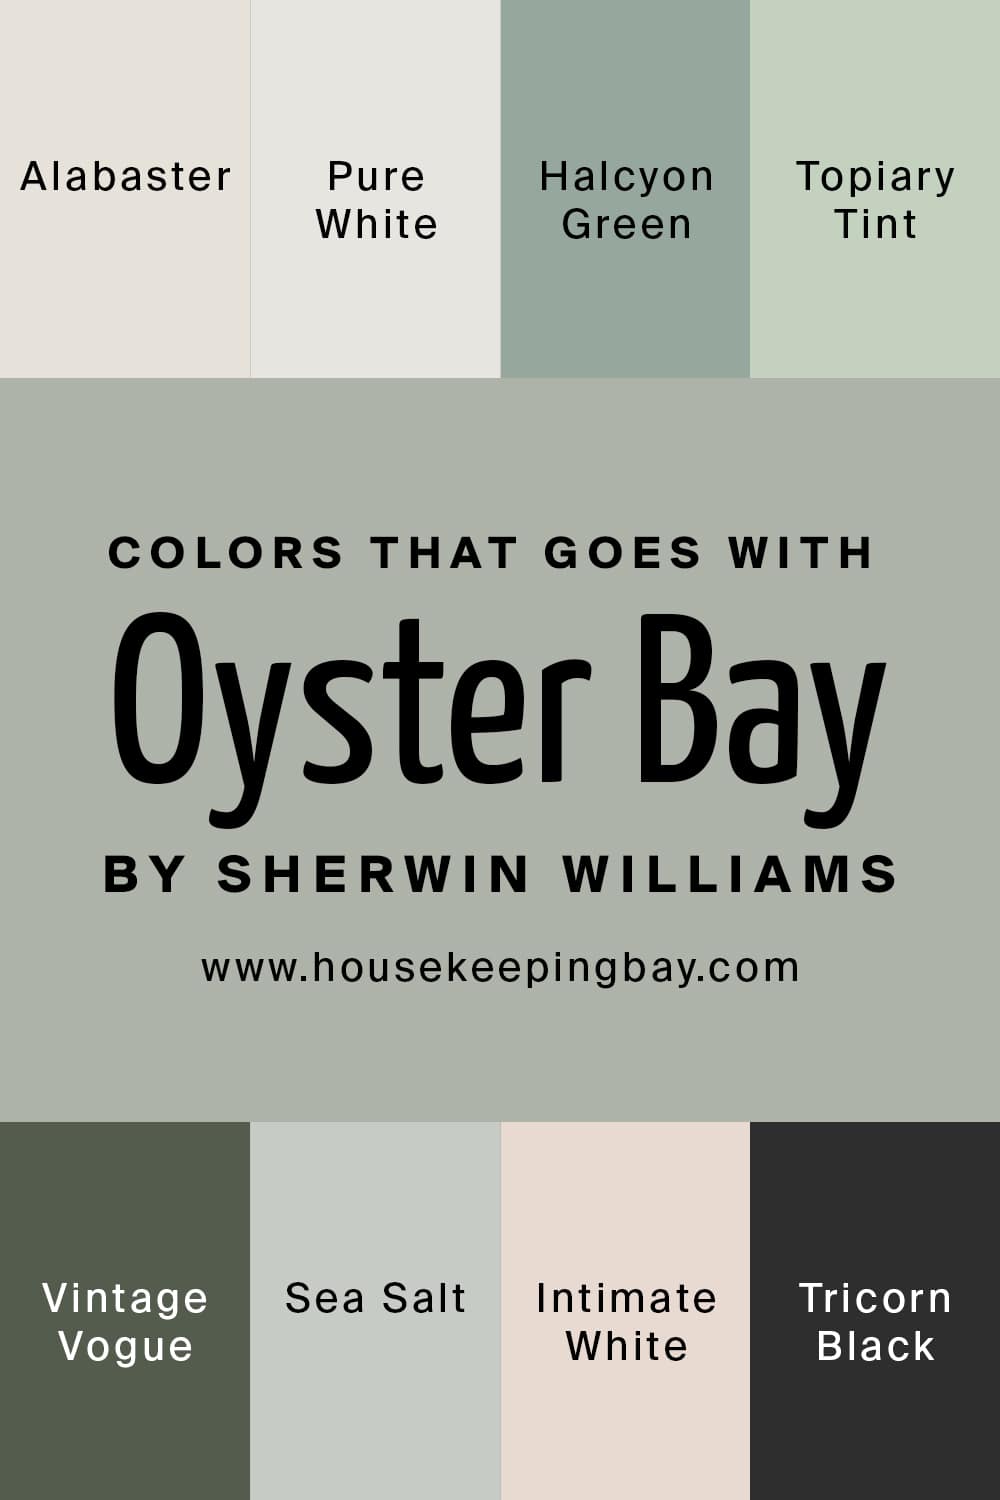 Colors that goes with Oyster Bay by Sherwin Williams